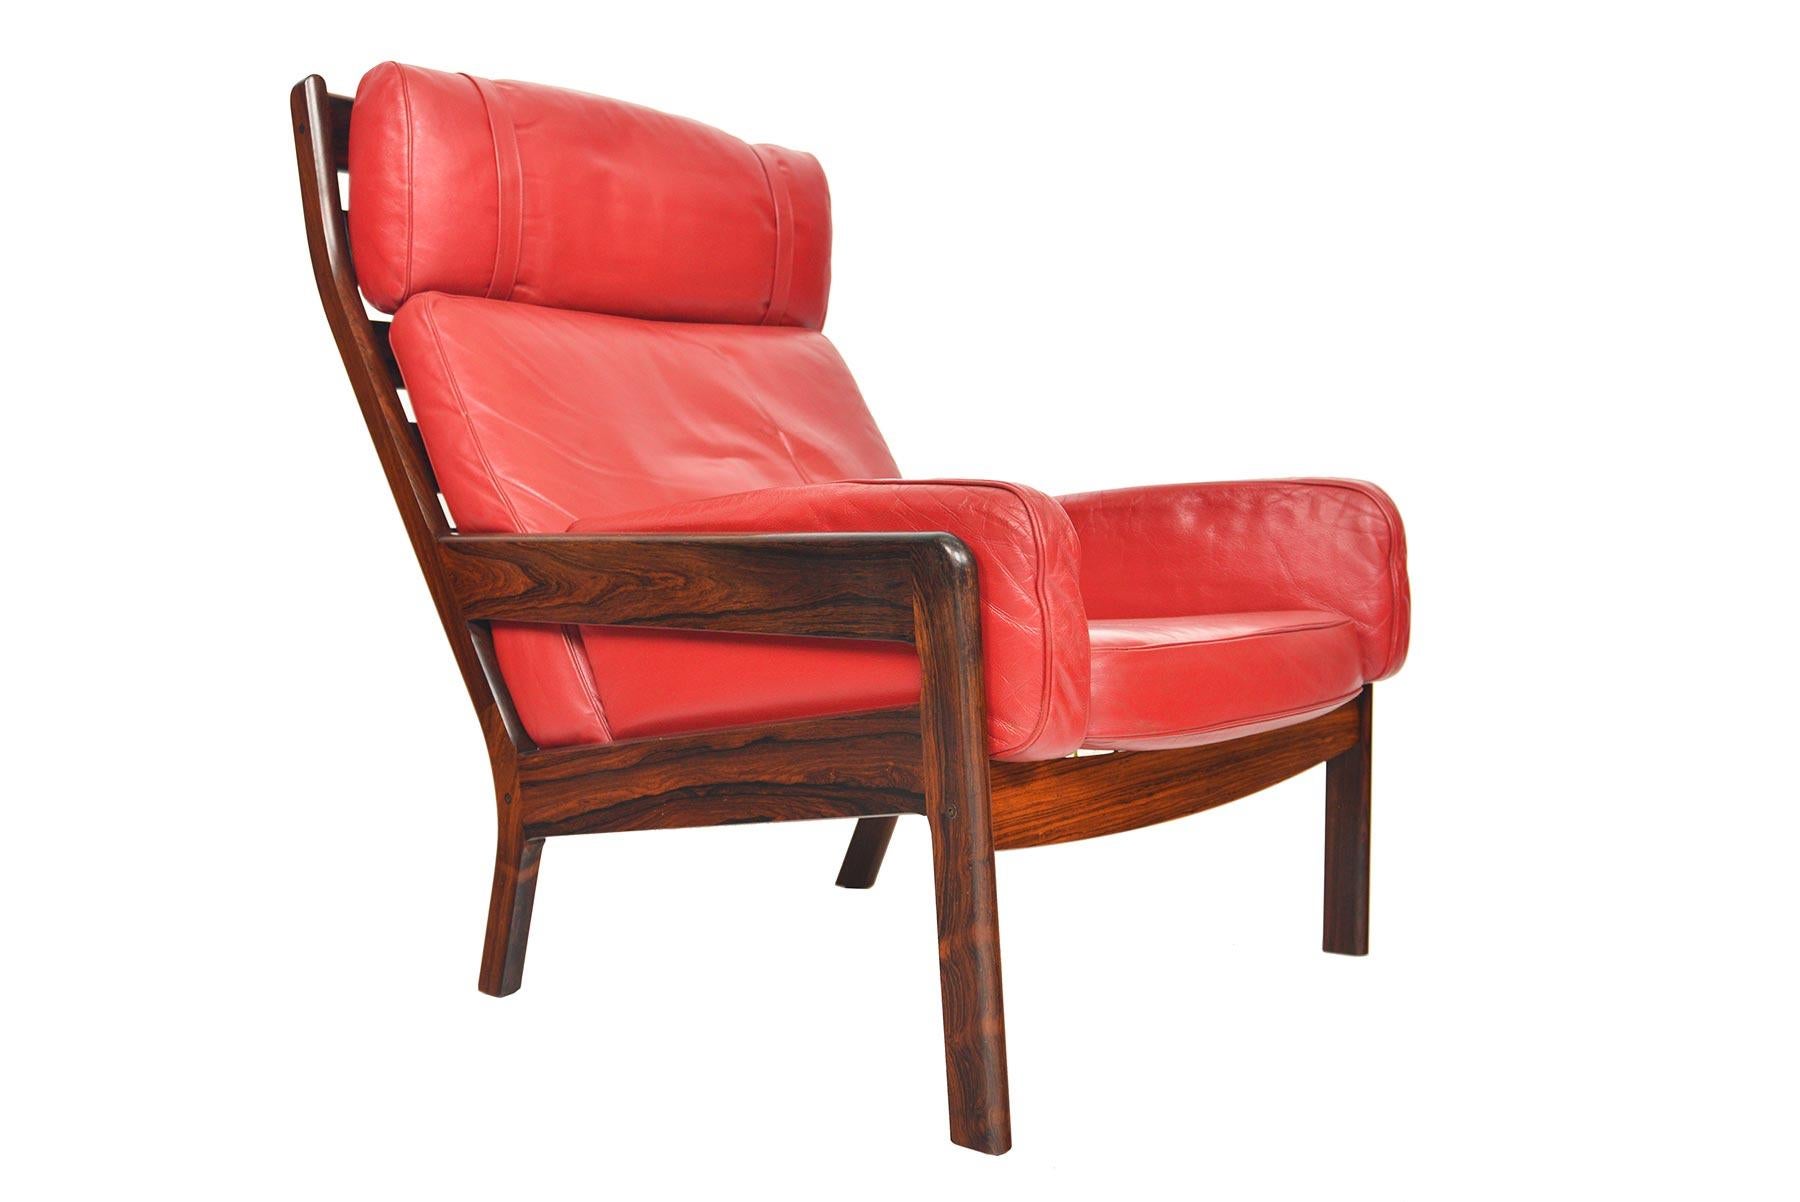 This beautiful Erik Ole Jørgensen highback lounge chair was produced for Georg Jørgensen + Son in the 1960s. This streamlined Model GJ 13 chair is covered in a vibrant red leather. Five leather cushions rest in the highback frame with original brass